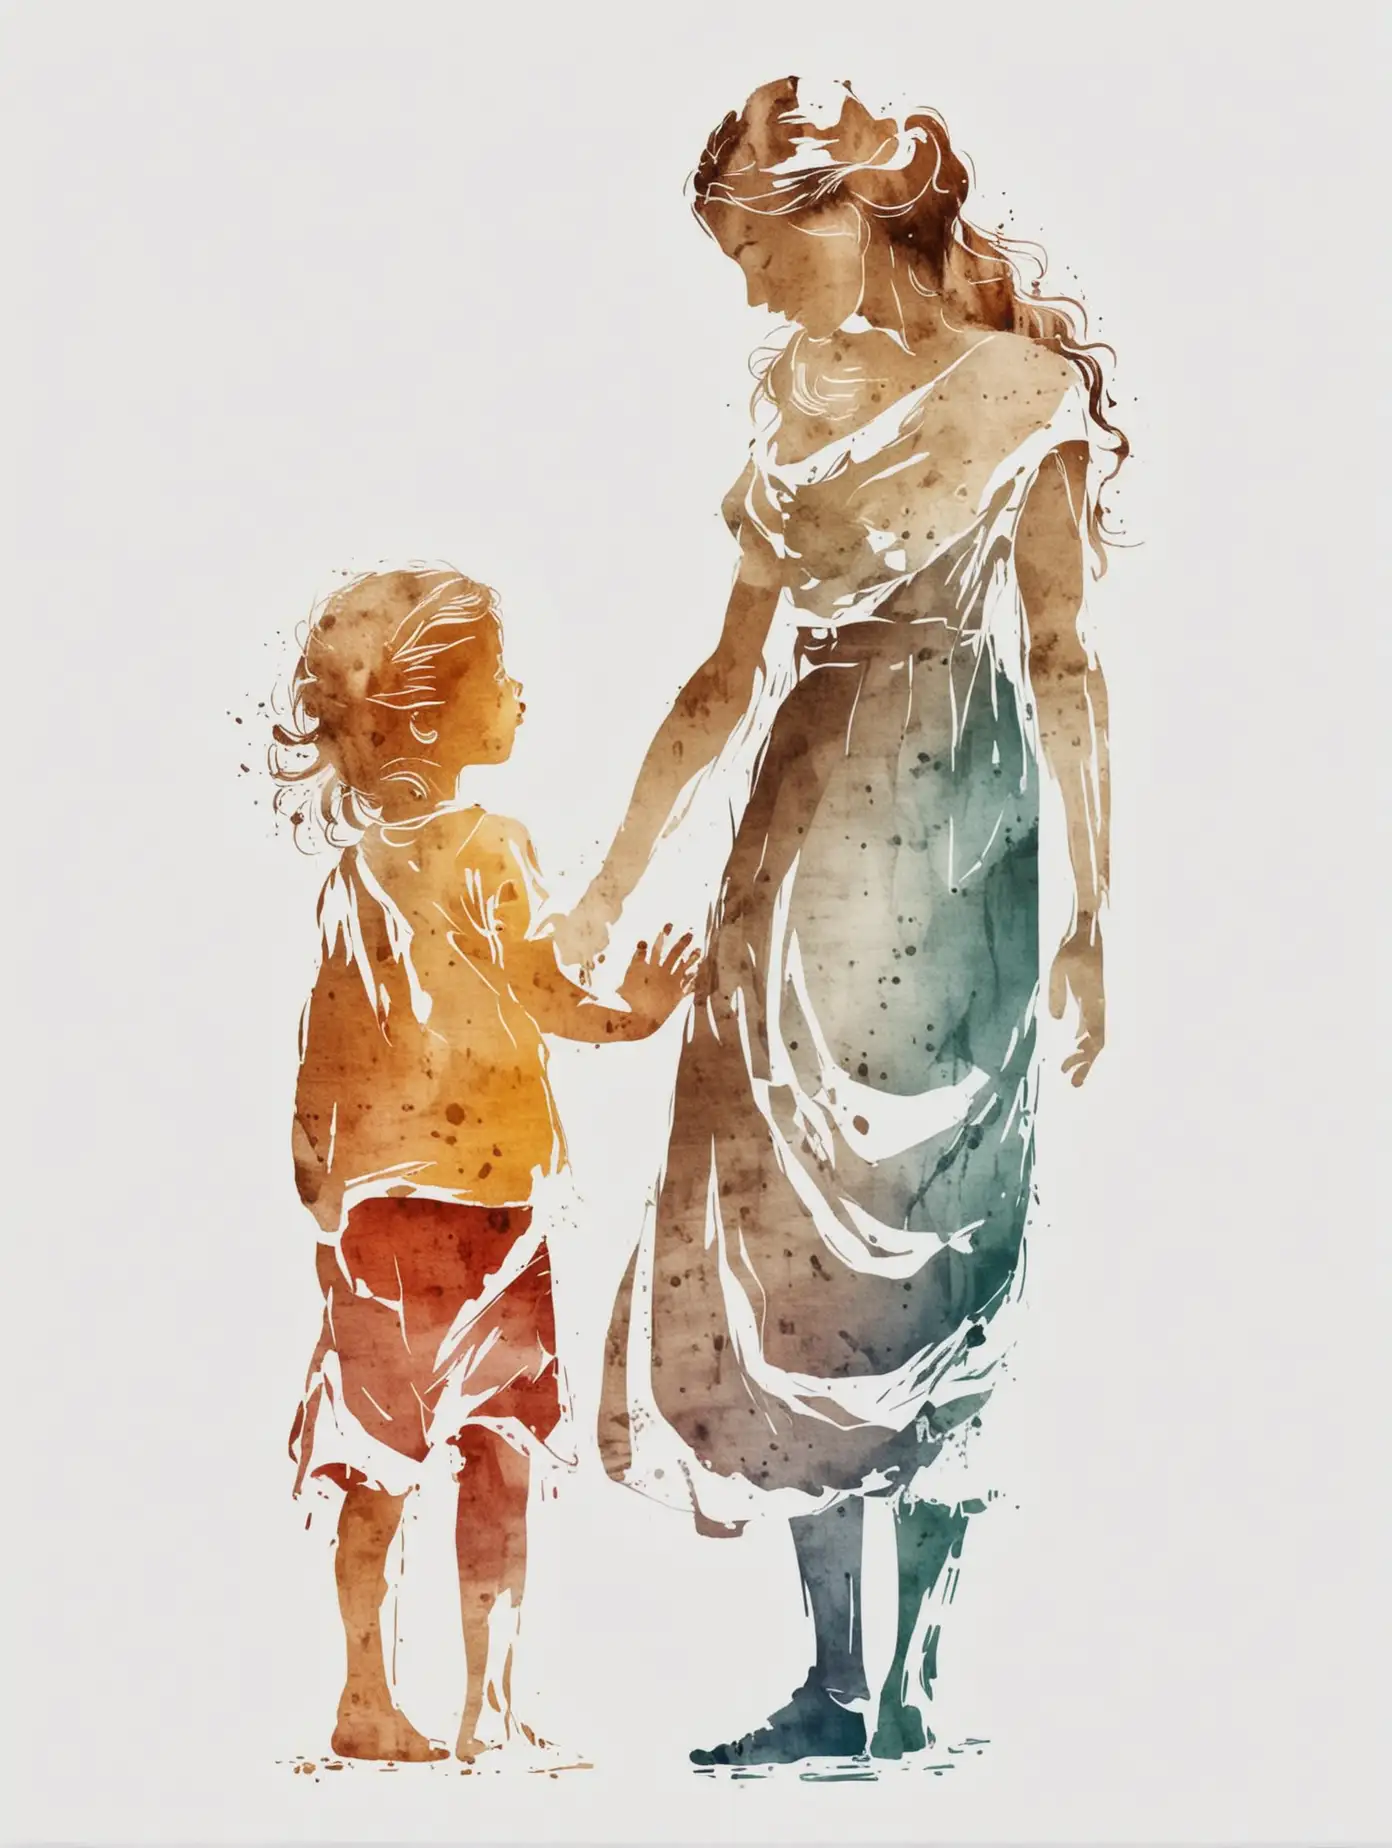 Silhouette of a Mother and Child in Artistic Colors on a White Background